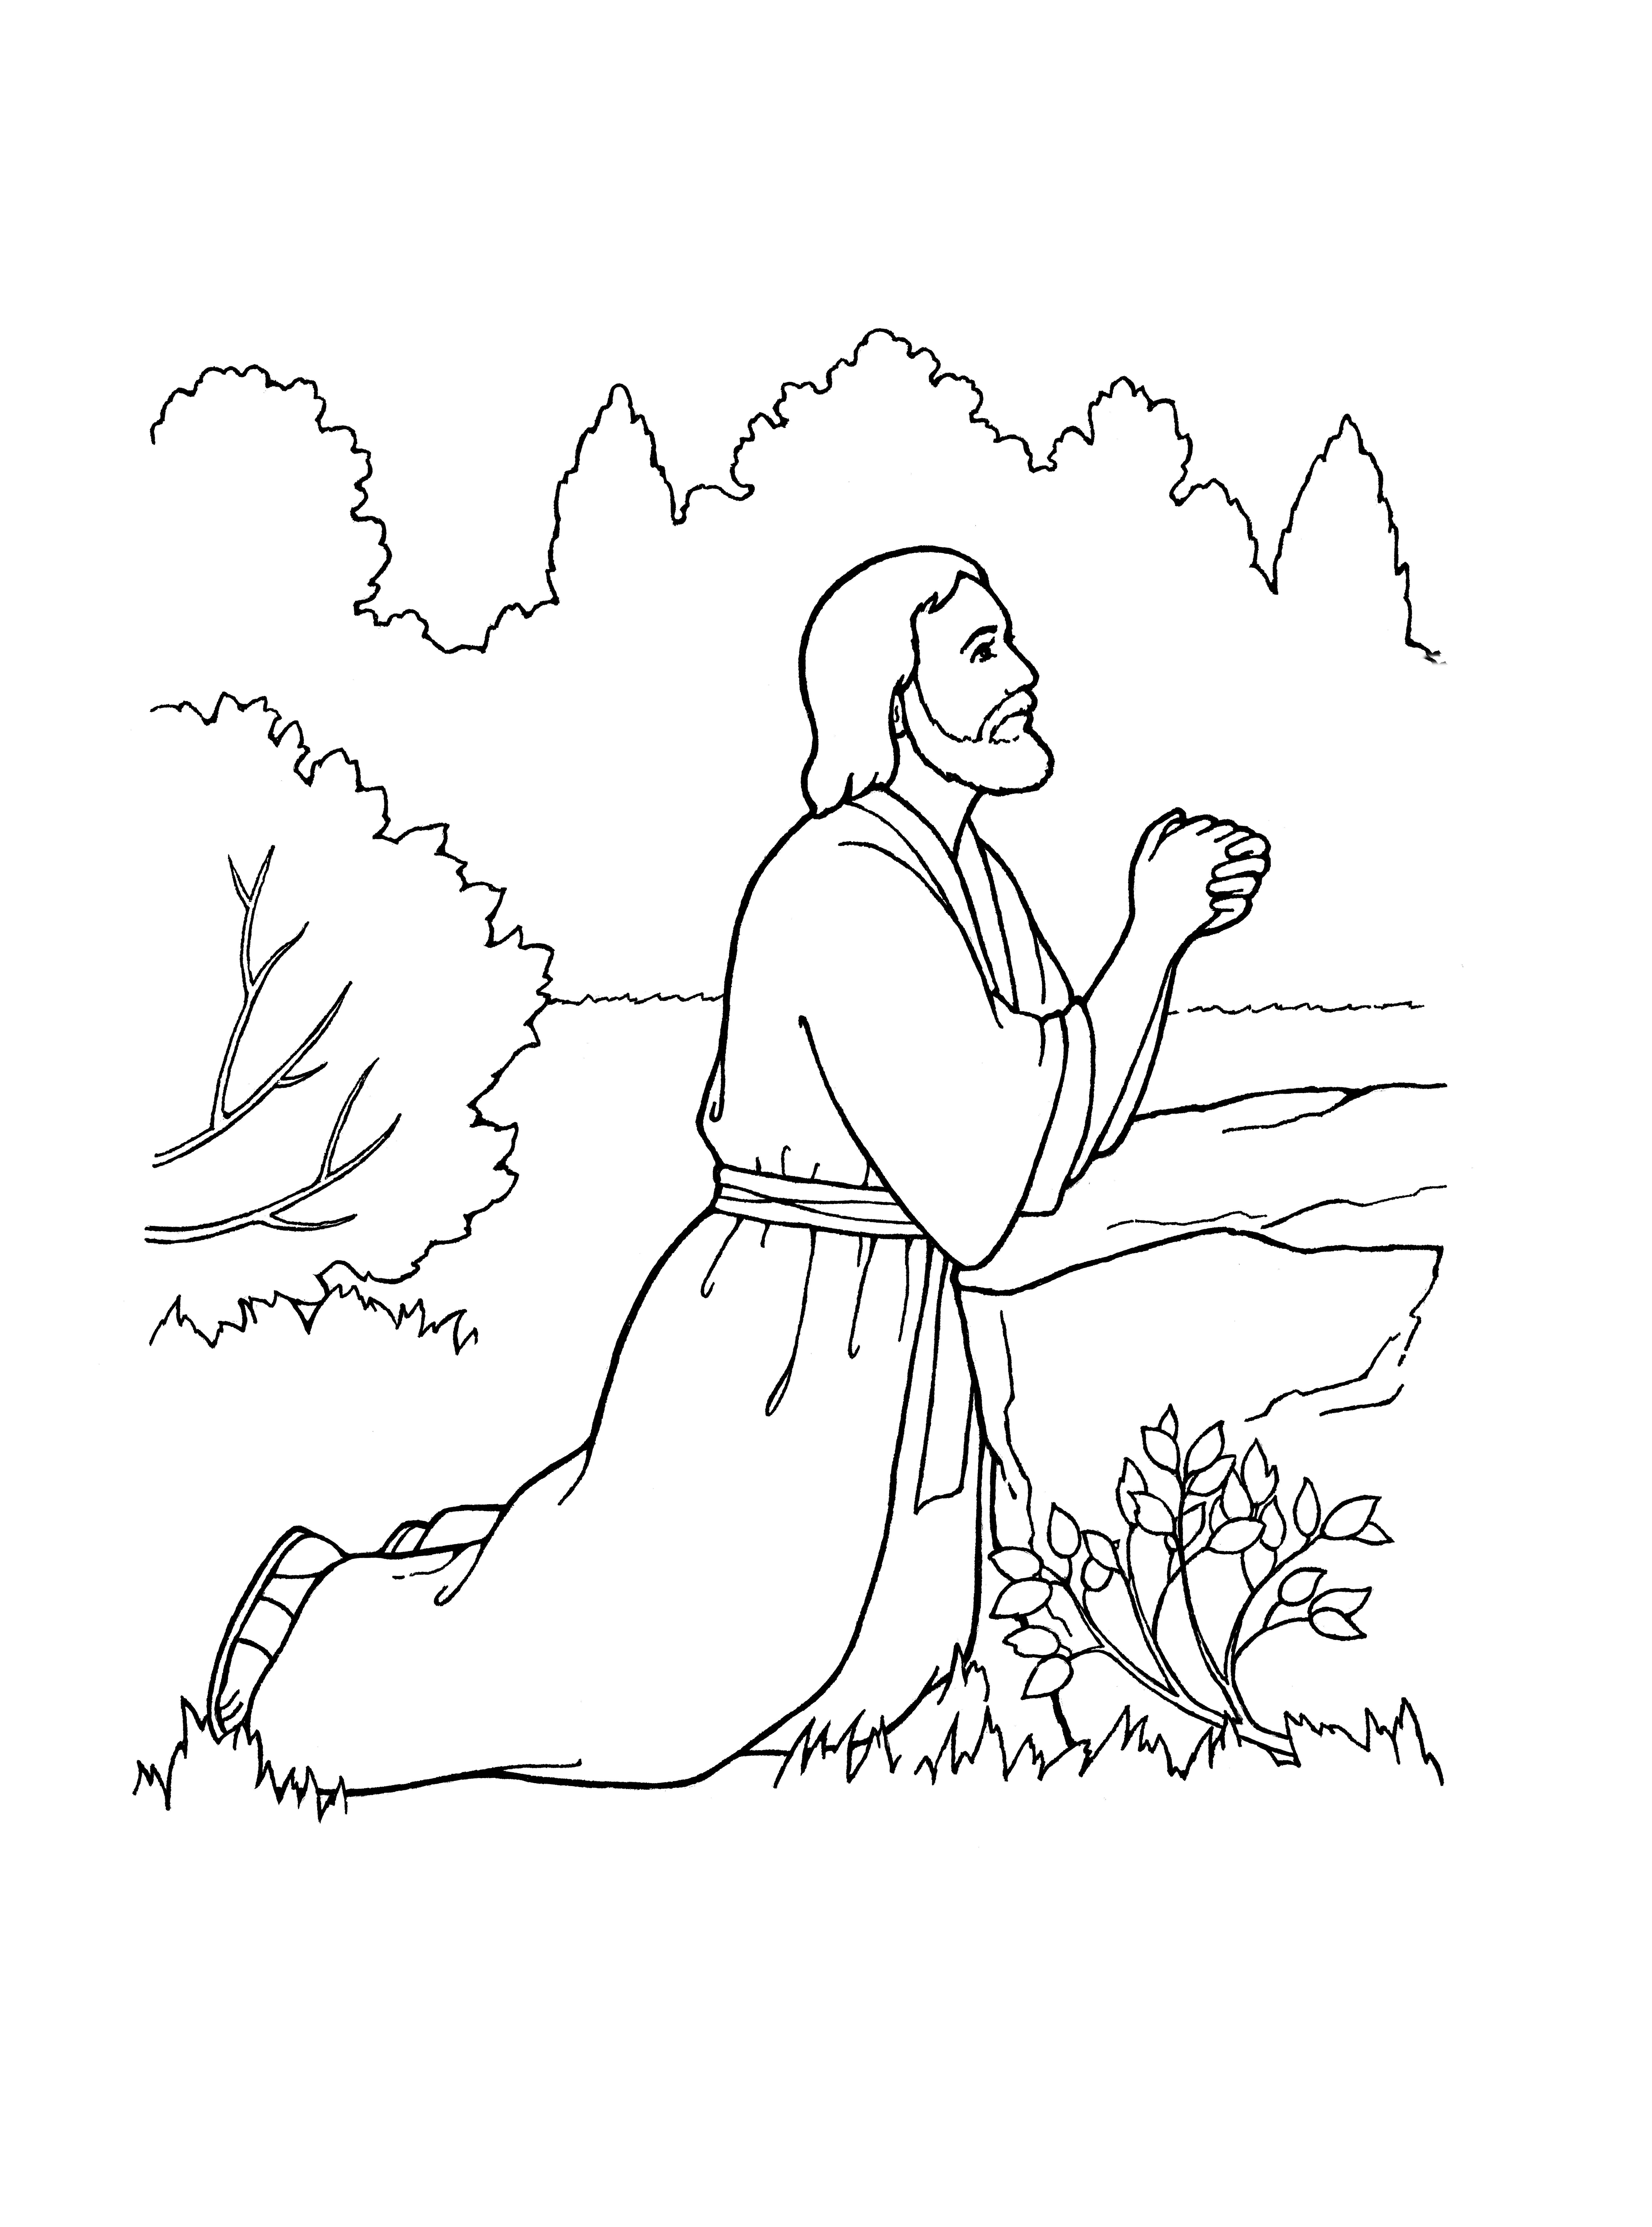 An illustration of the third article of faith—“Atonement” (Jesus Christ praying in the Garden of Gethsemane).